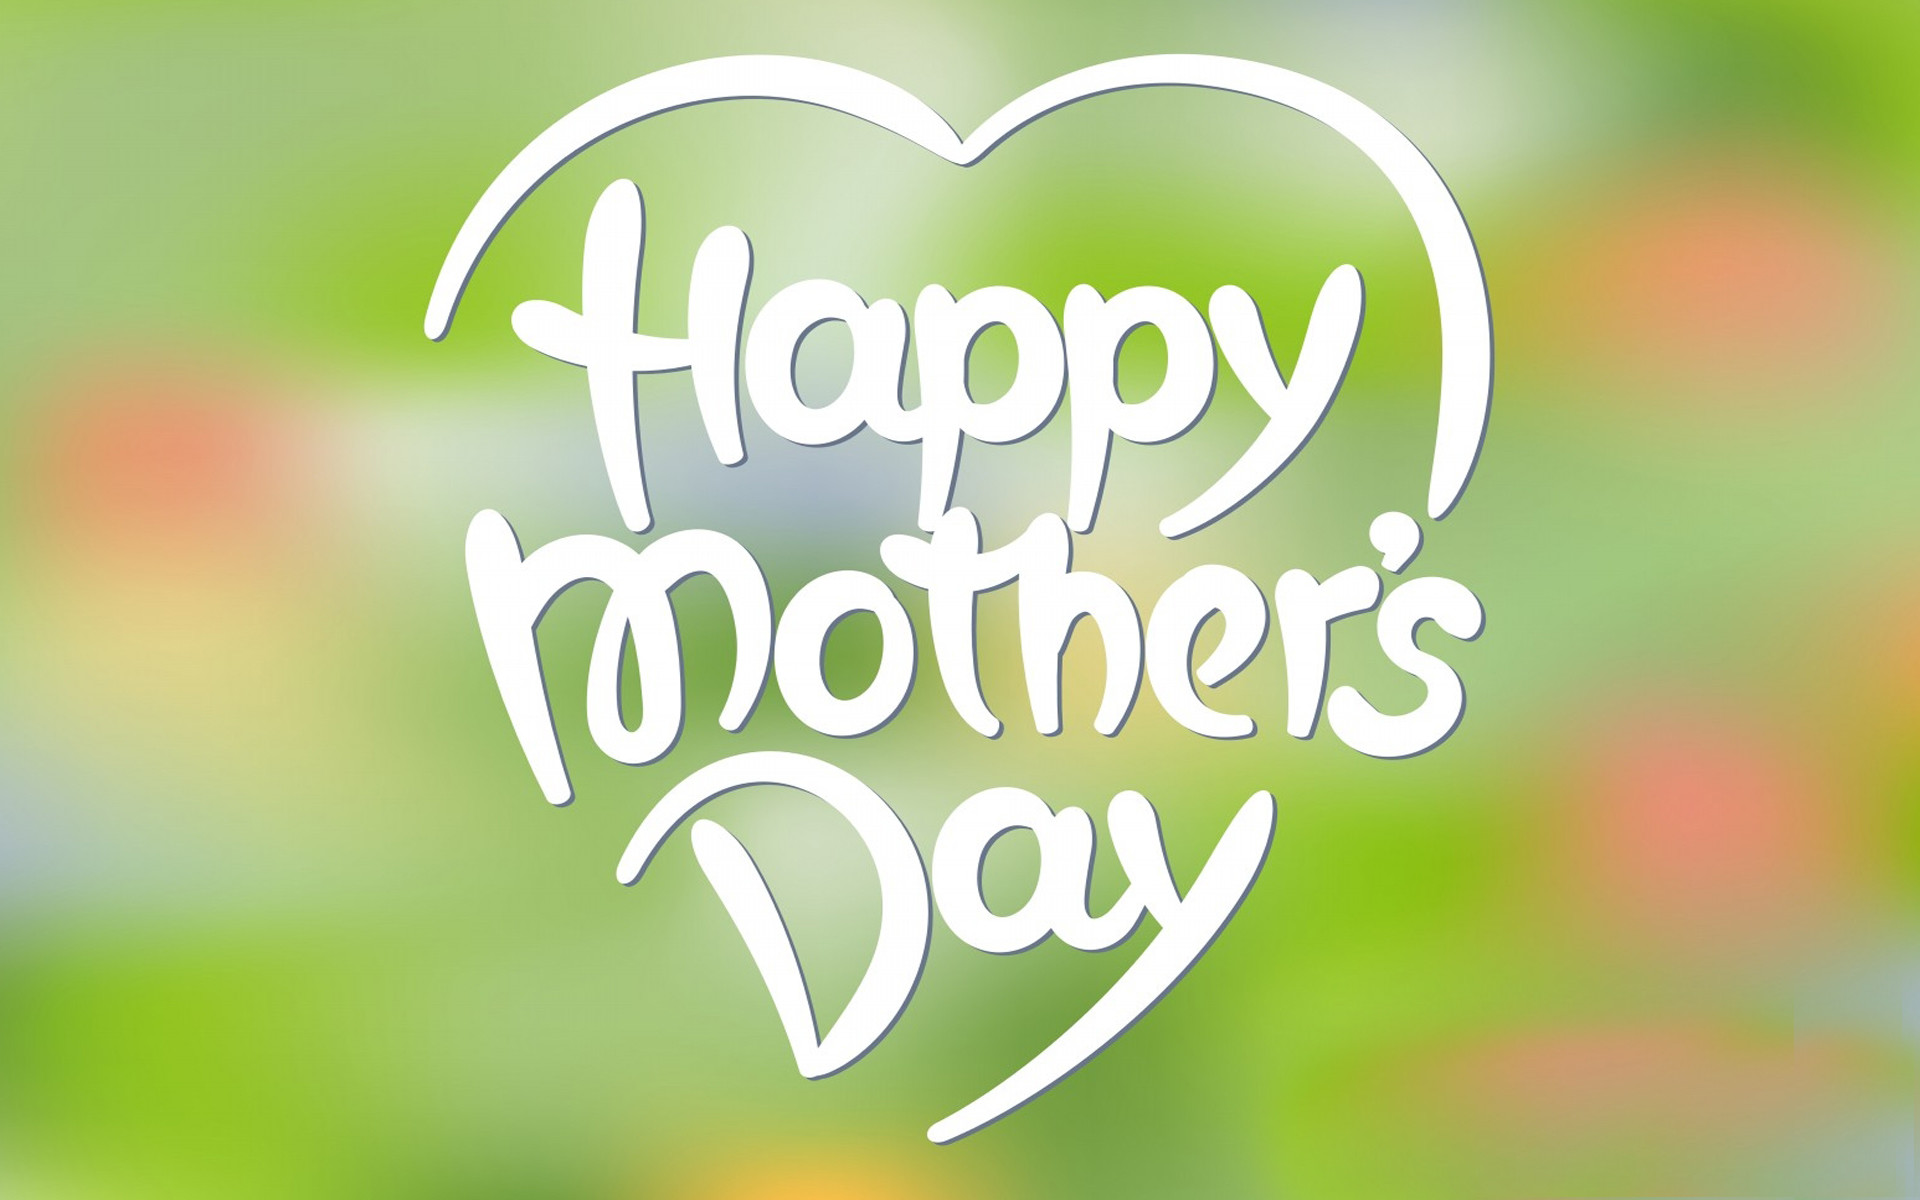 I Love You Mom Wallpaper Free Download Happy Mothers Day Hd 19x10 Wallpaper Teahub Io